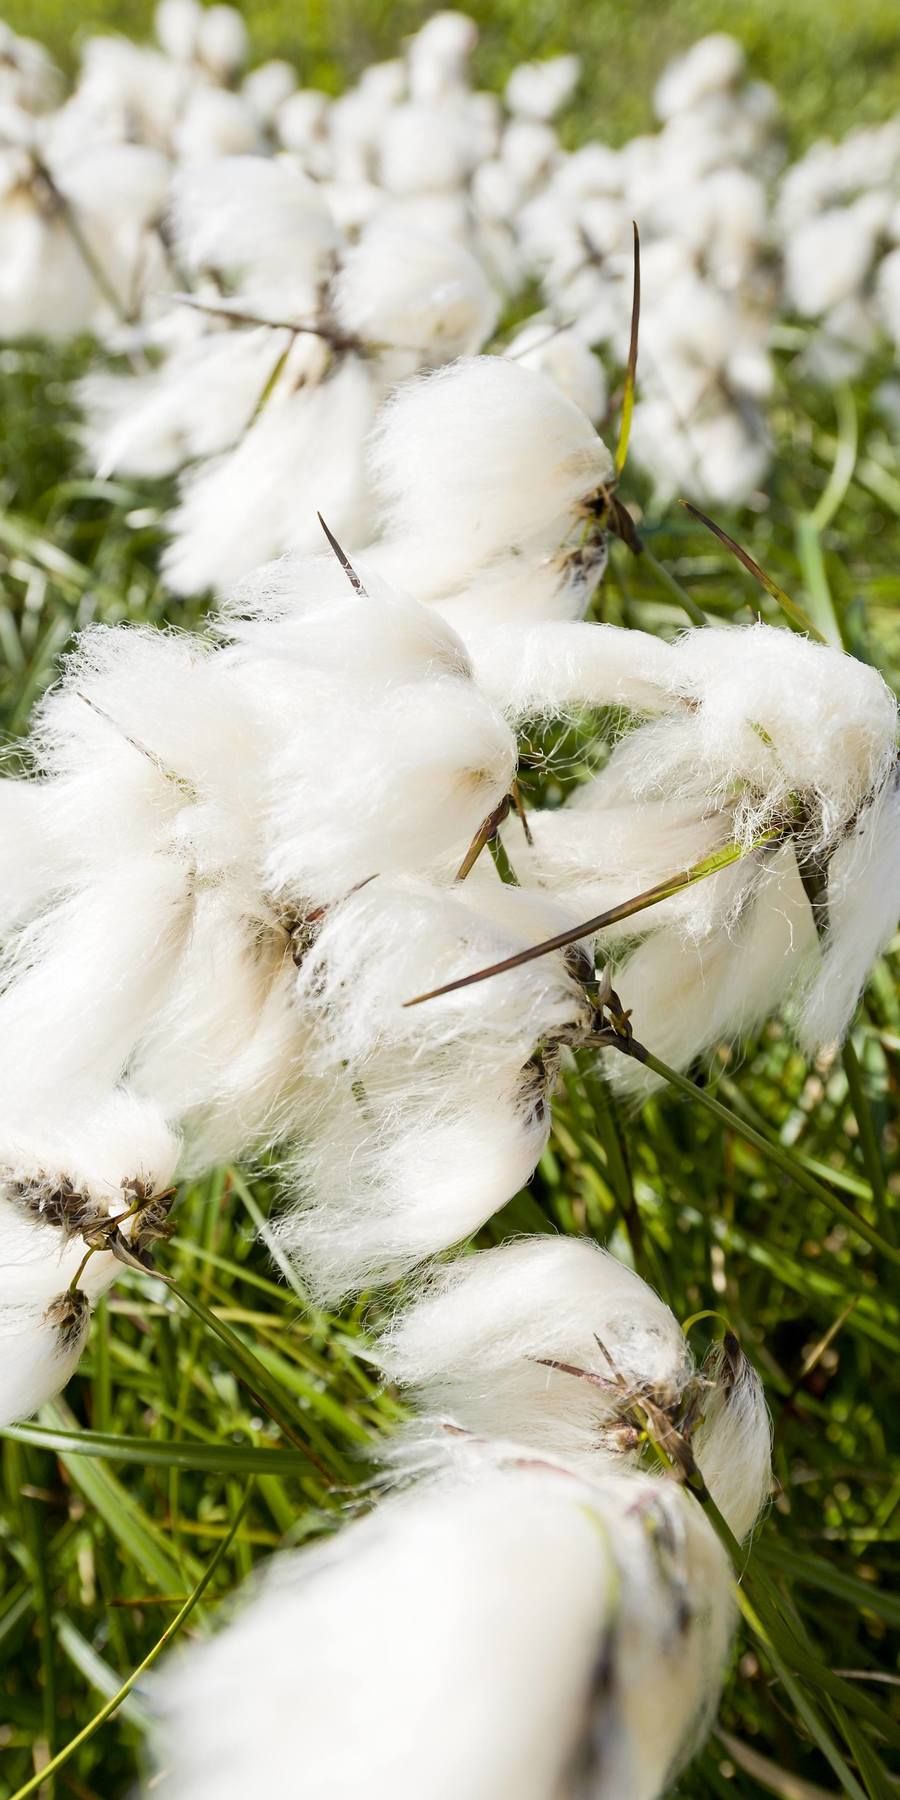 The flower common cottongrass